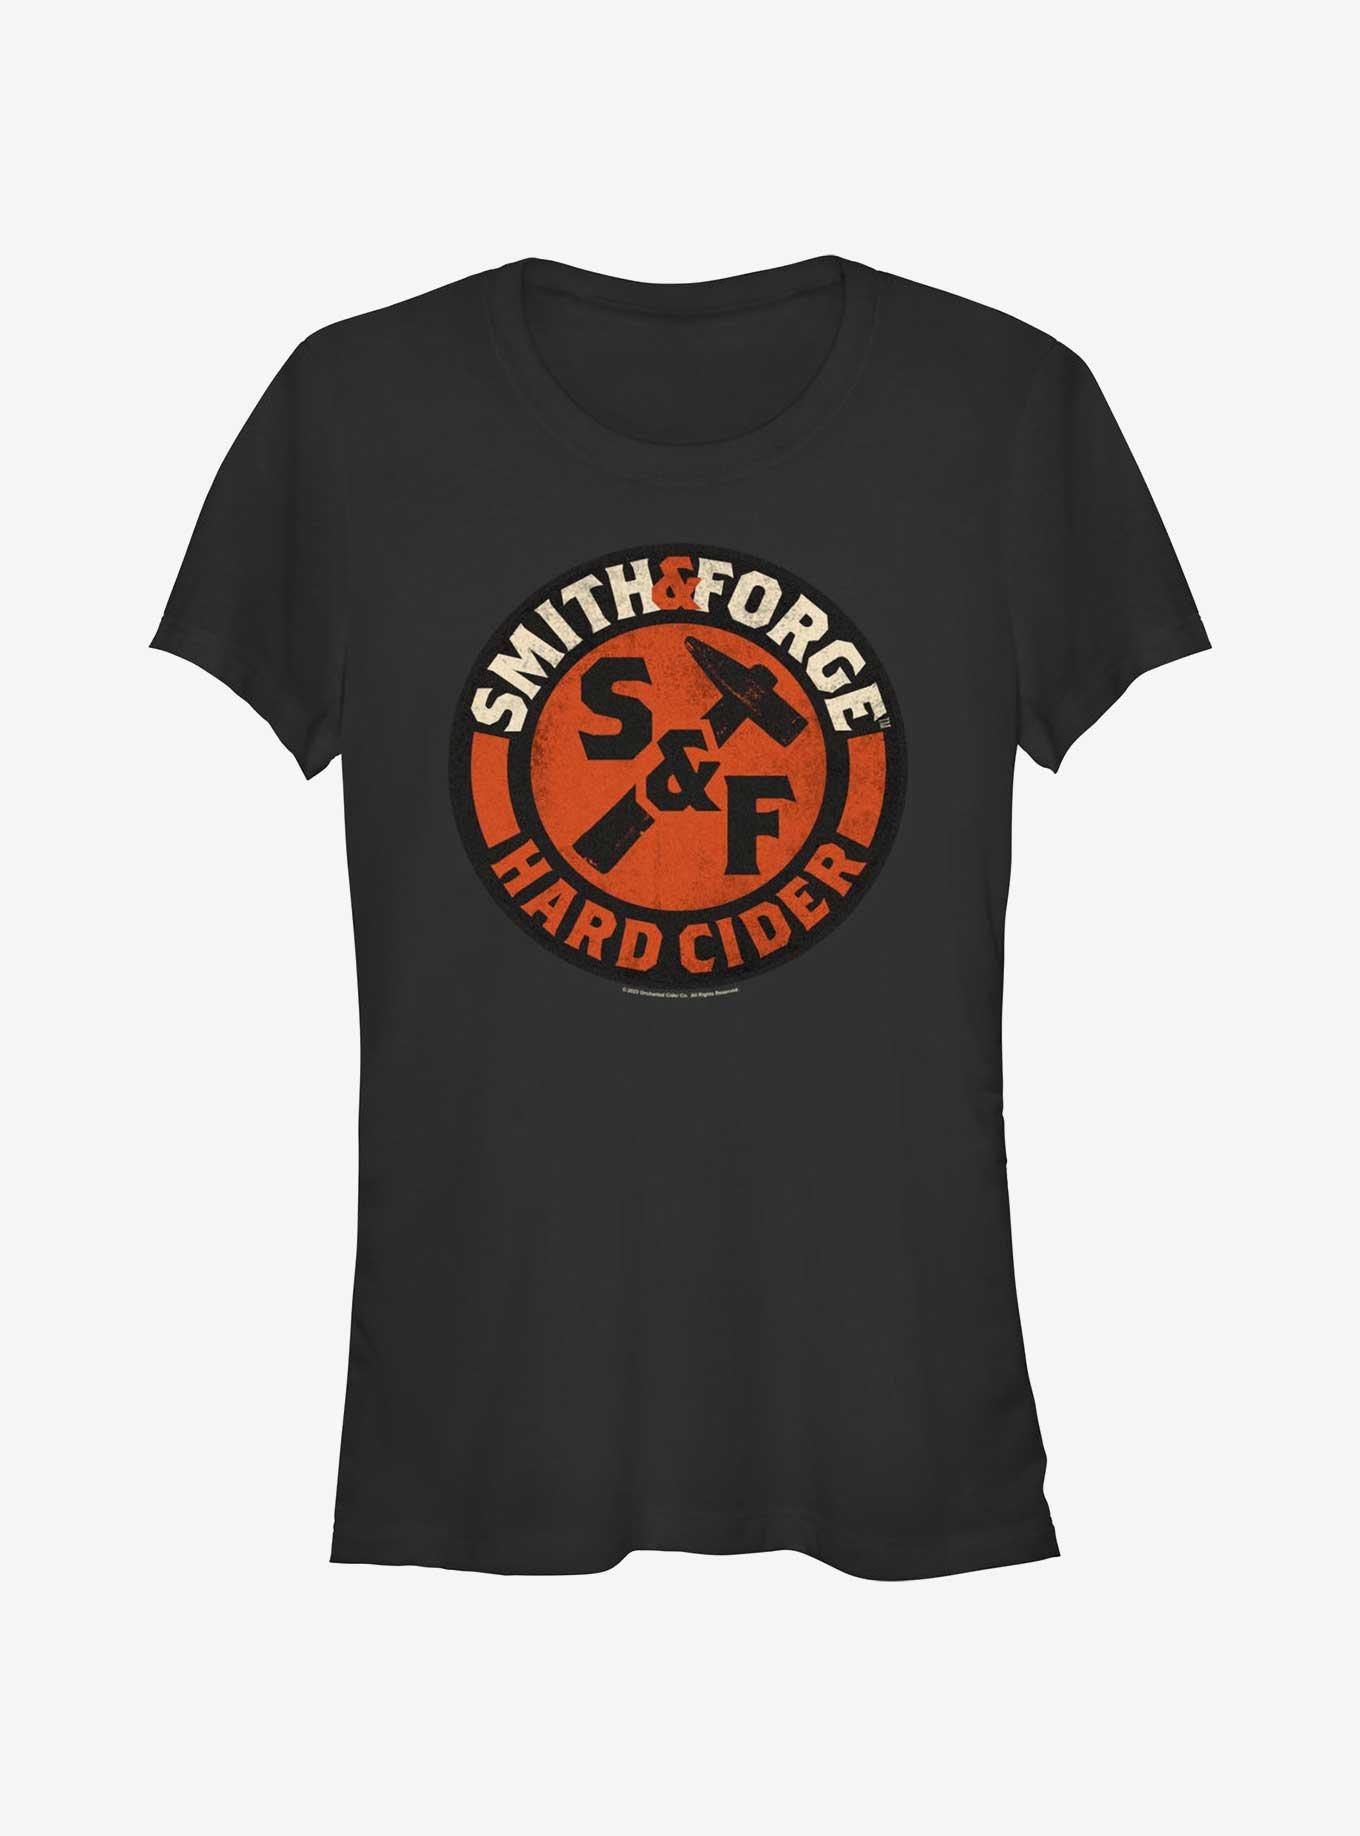 Coors Brewing Company Smith & Forge Hard Cider Girls T-Shirt, , hi-res